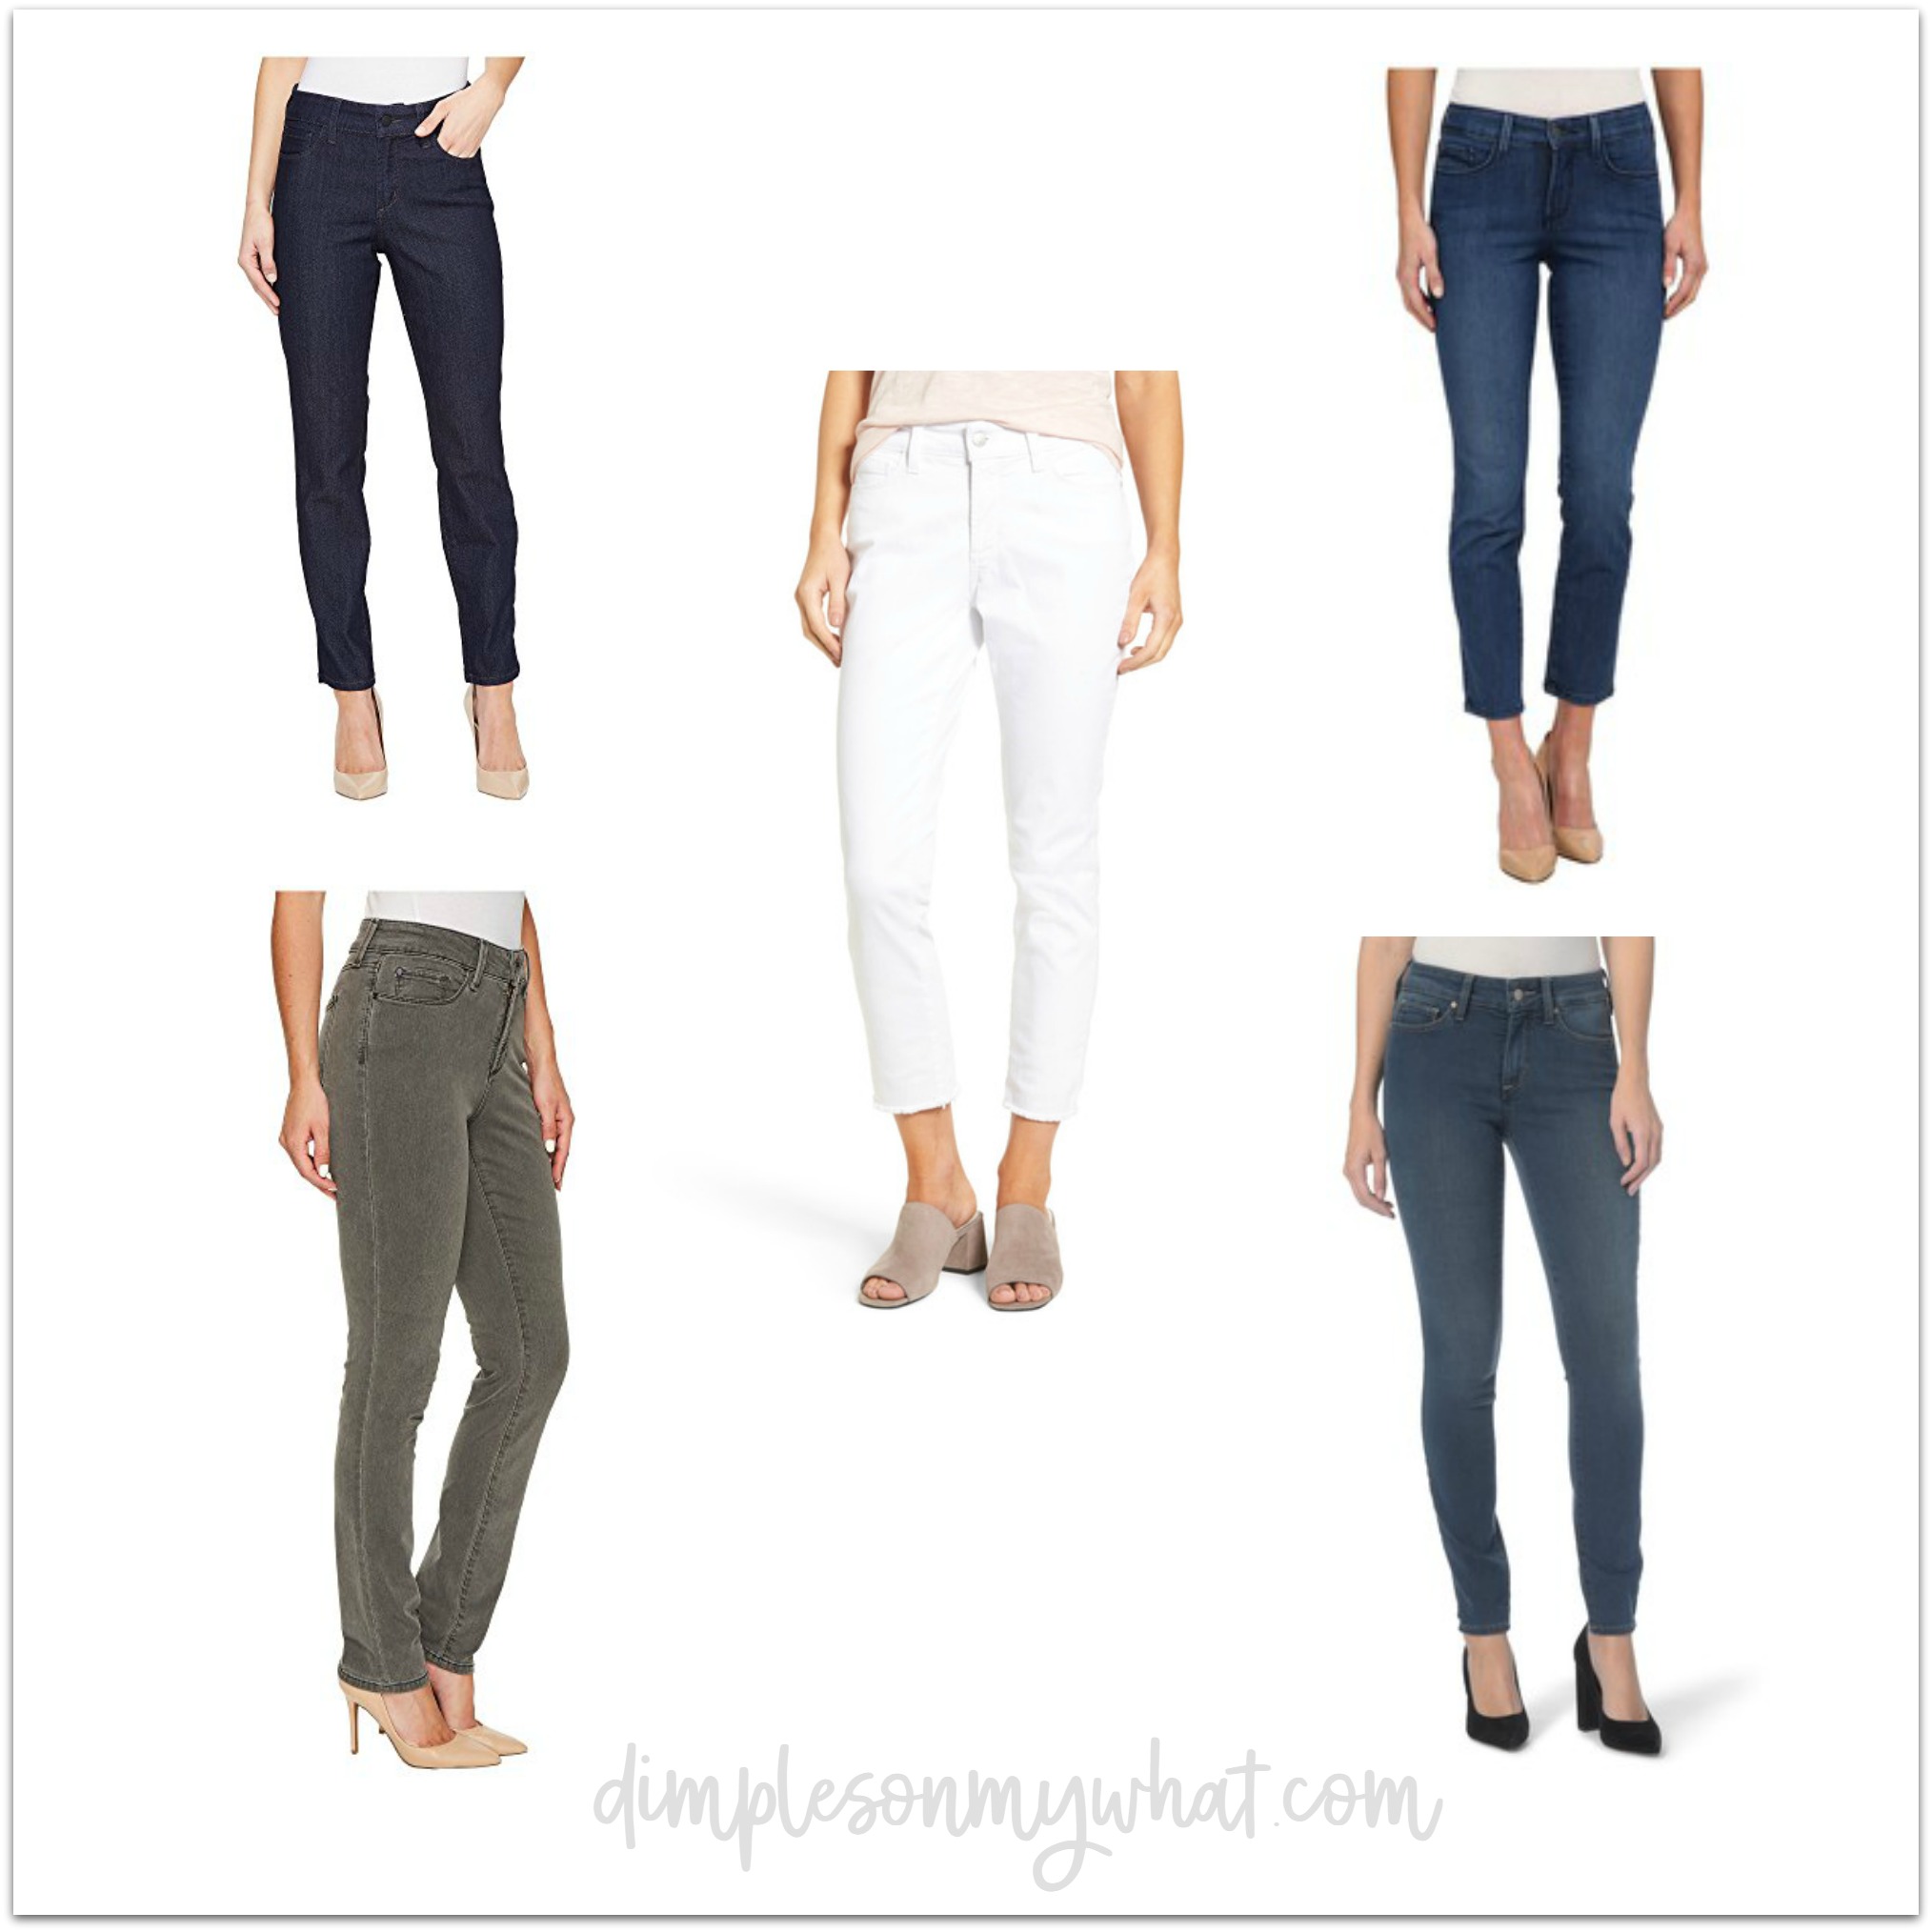 mom jeans reinvented | my favorite mom jeans | fashion for women over 50